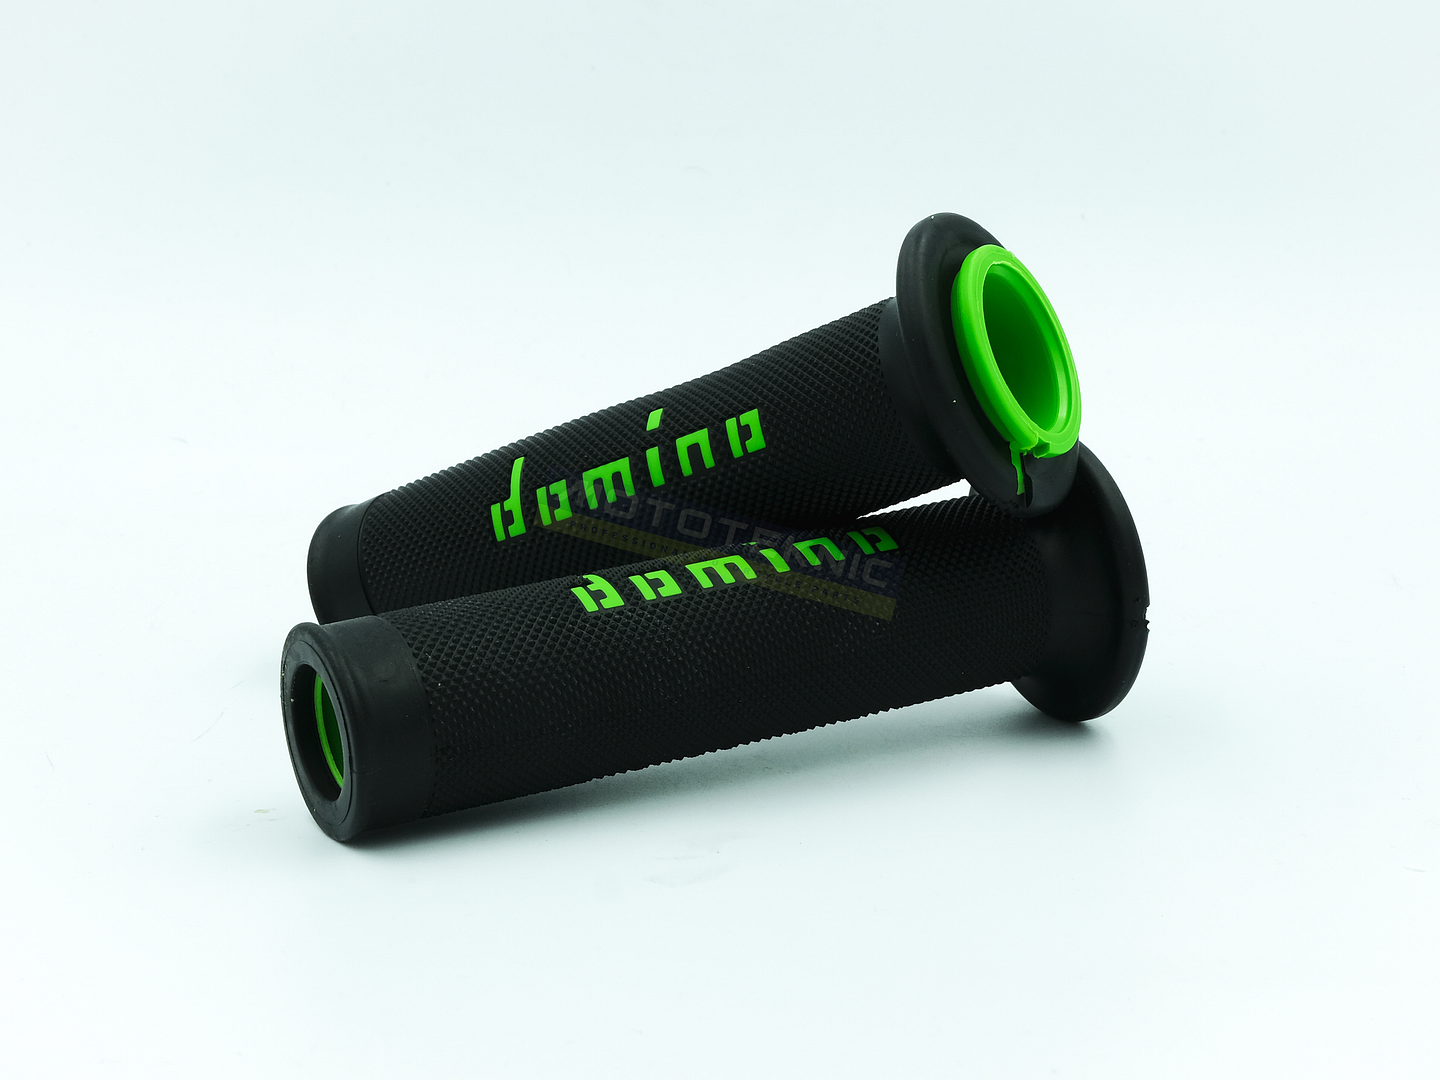 Domino Now free shipping Full Colorado Springs Mall Diamond Green & Black A010 Tr Race to fit Grips Road